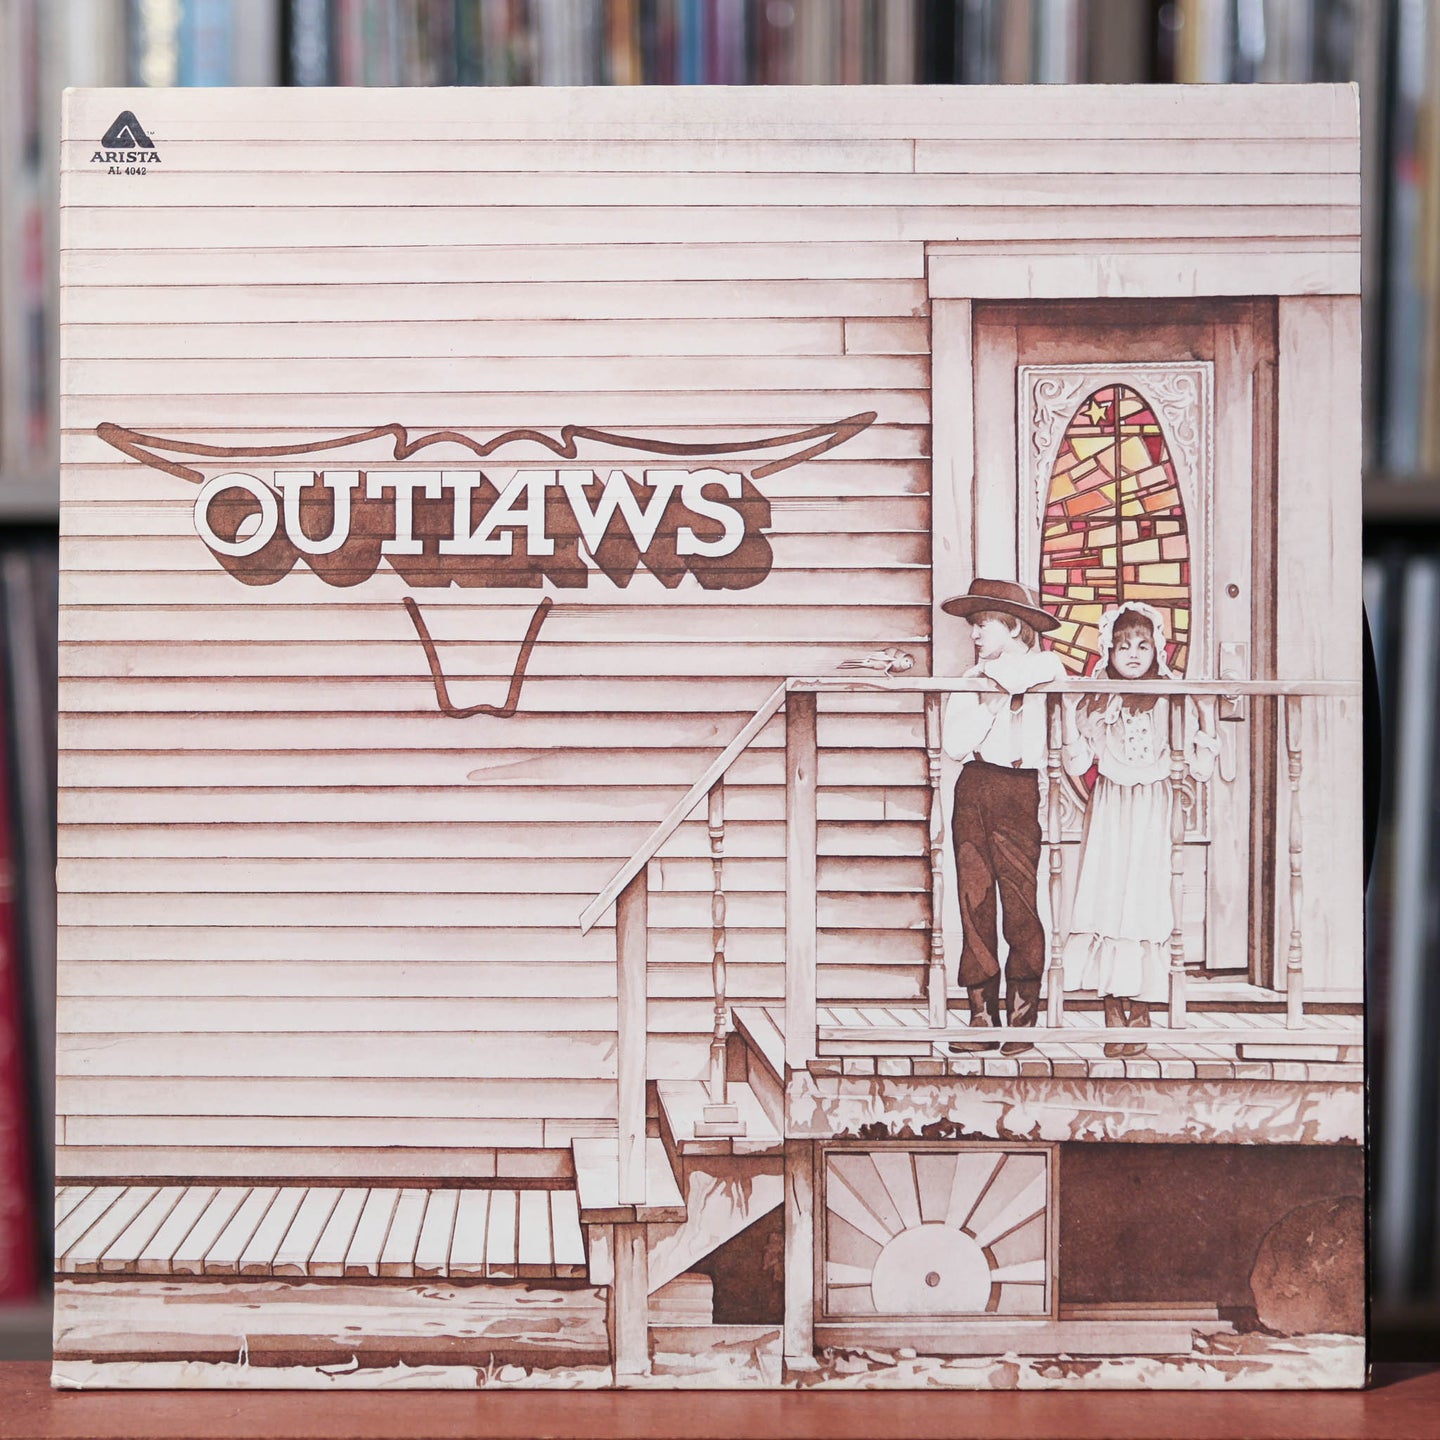 The Outlaws  – Outlaws - 1975 Arista, EX/VG